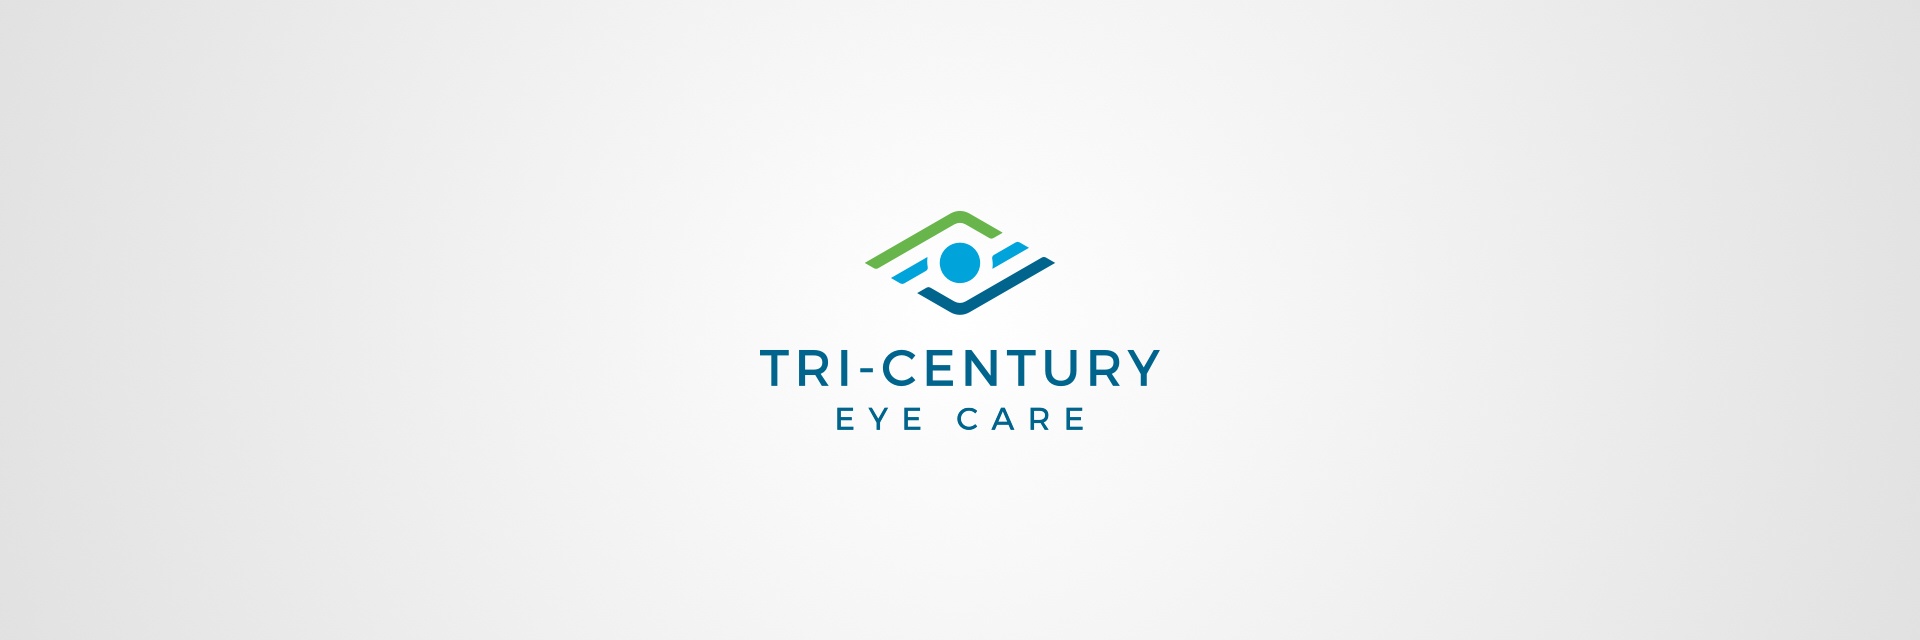 Tri-County Eye and Century Eye Care Officially Merge Image 1